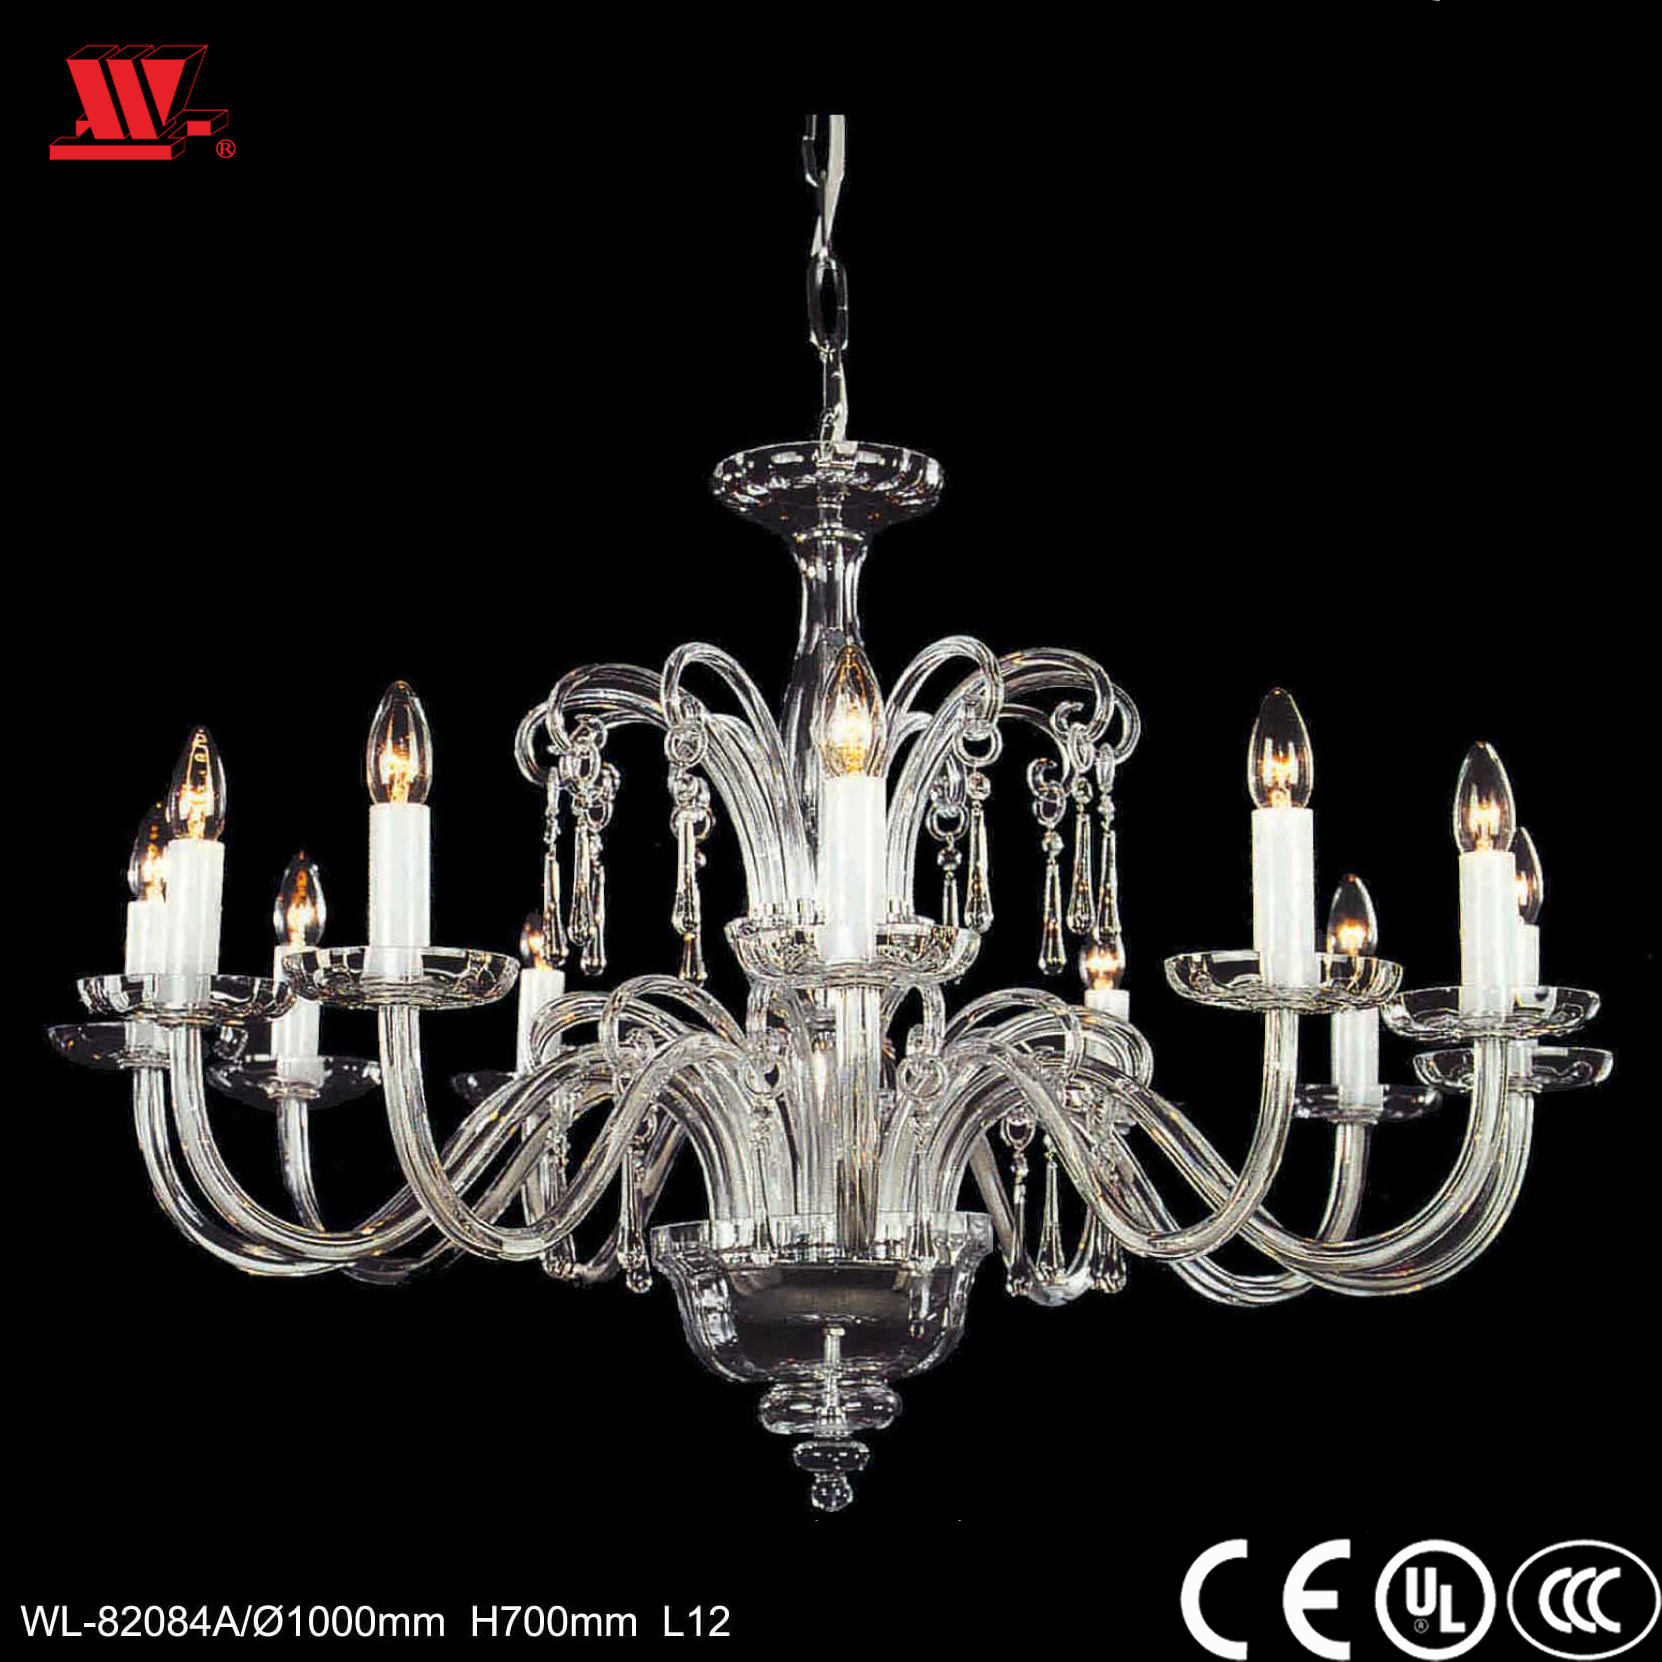 Traditional Crystal Chandelier with Glass Decoration Wl-82084A